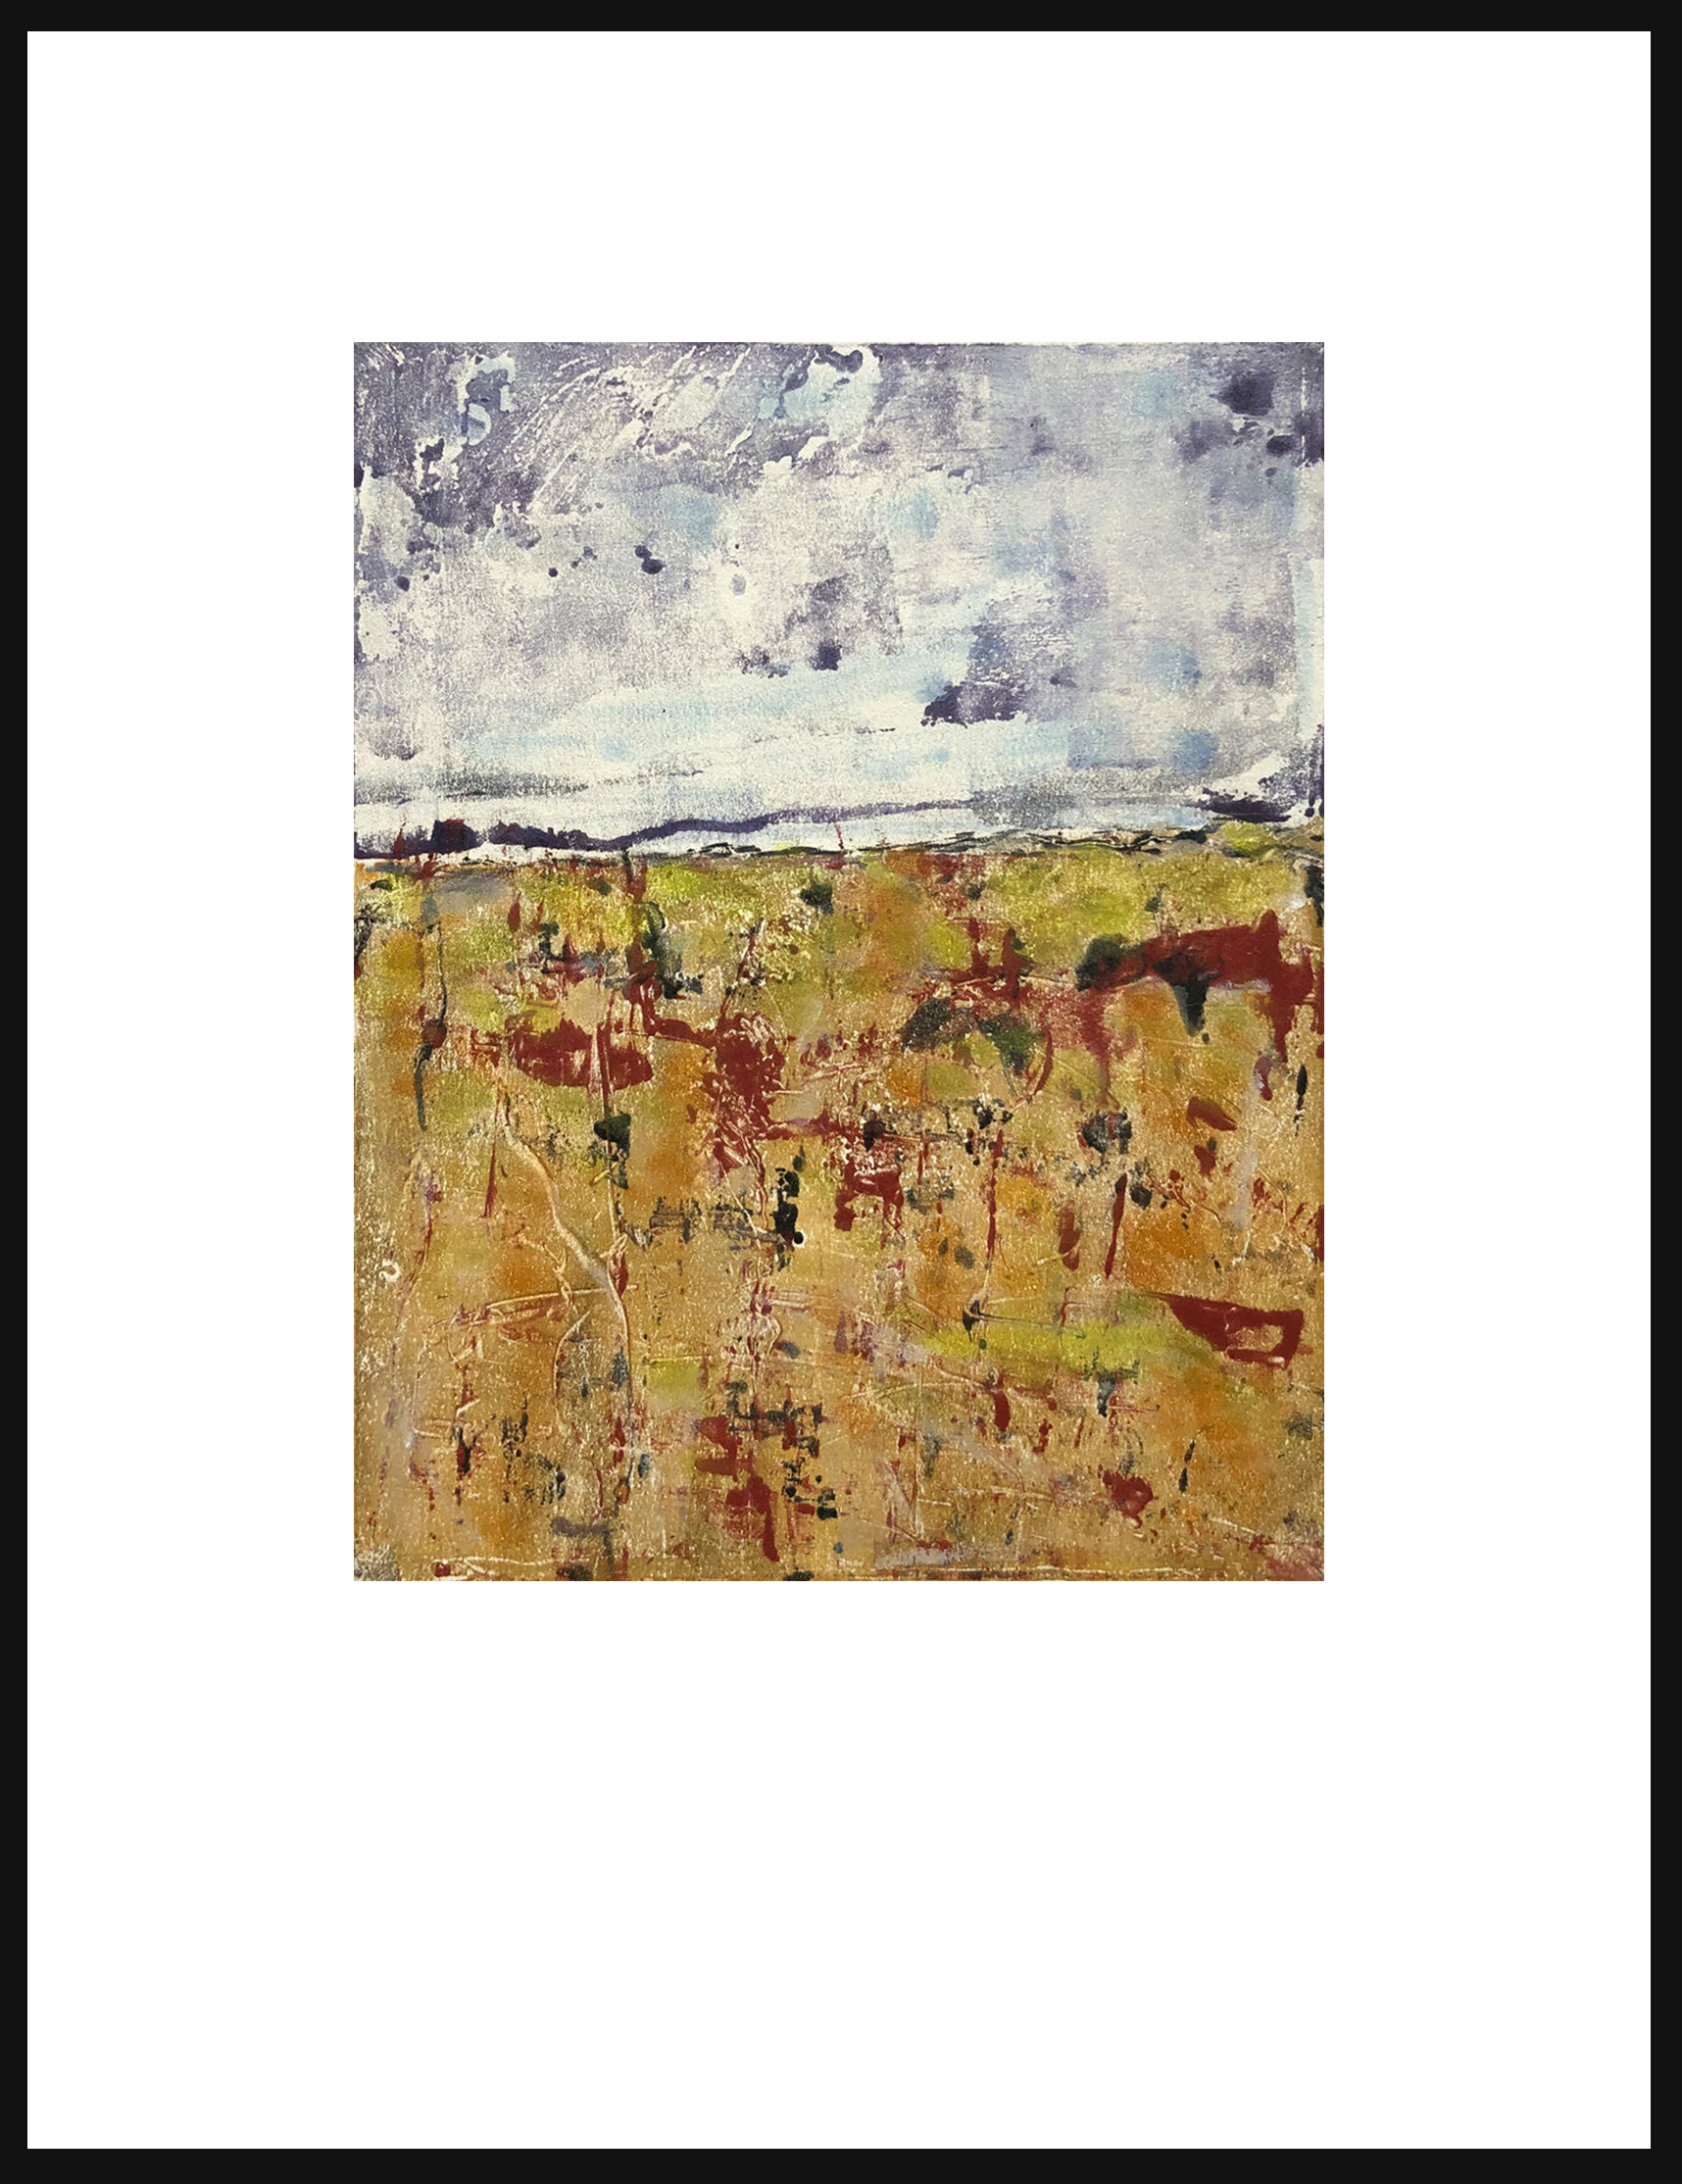    Oh, Spring!    It’s that time of year where I begin to wish for green in our Central Oregon landscape. Oh, Spring, I’d sure like to see you! Mixed media monoprint, 14 x 11 matted and framed. 1/1   $275   Shipping and handling are not included in t